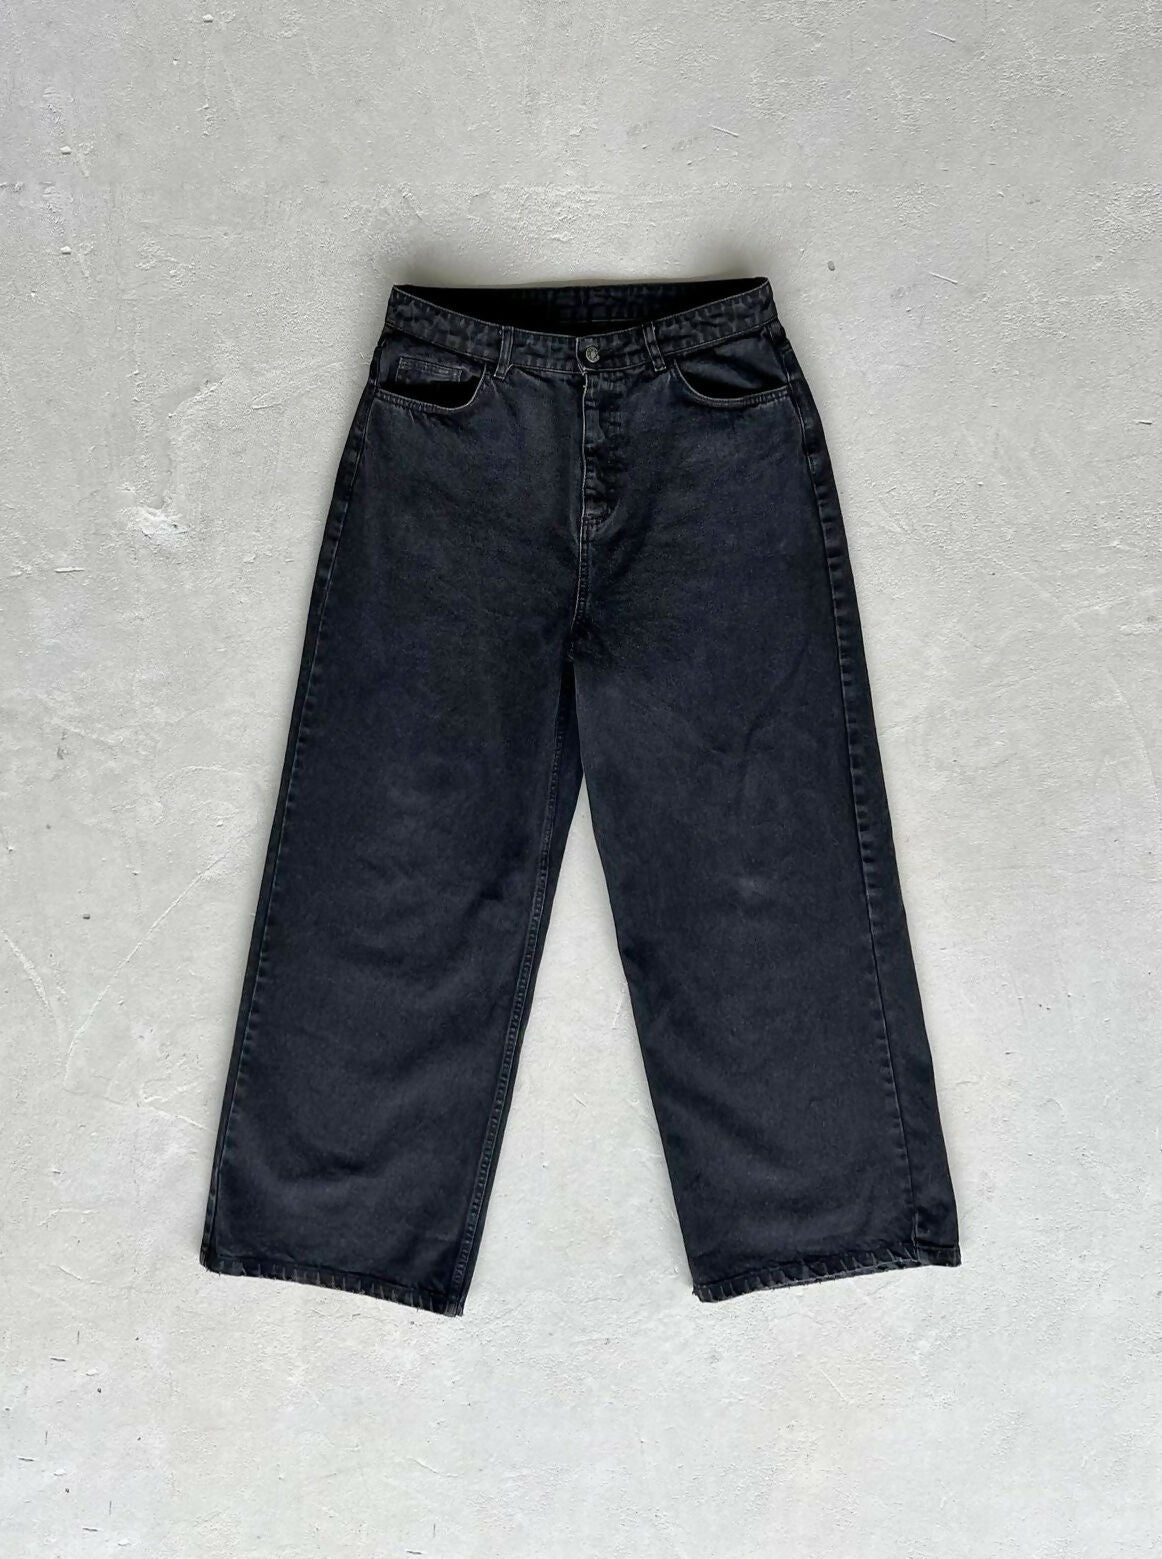 Sample Baggy Jeans